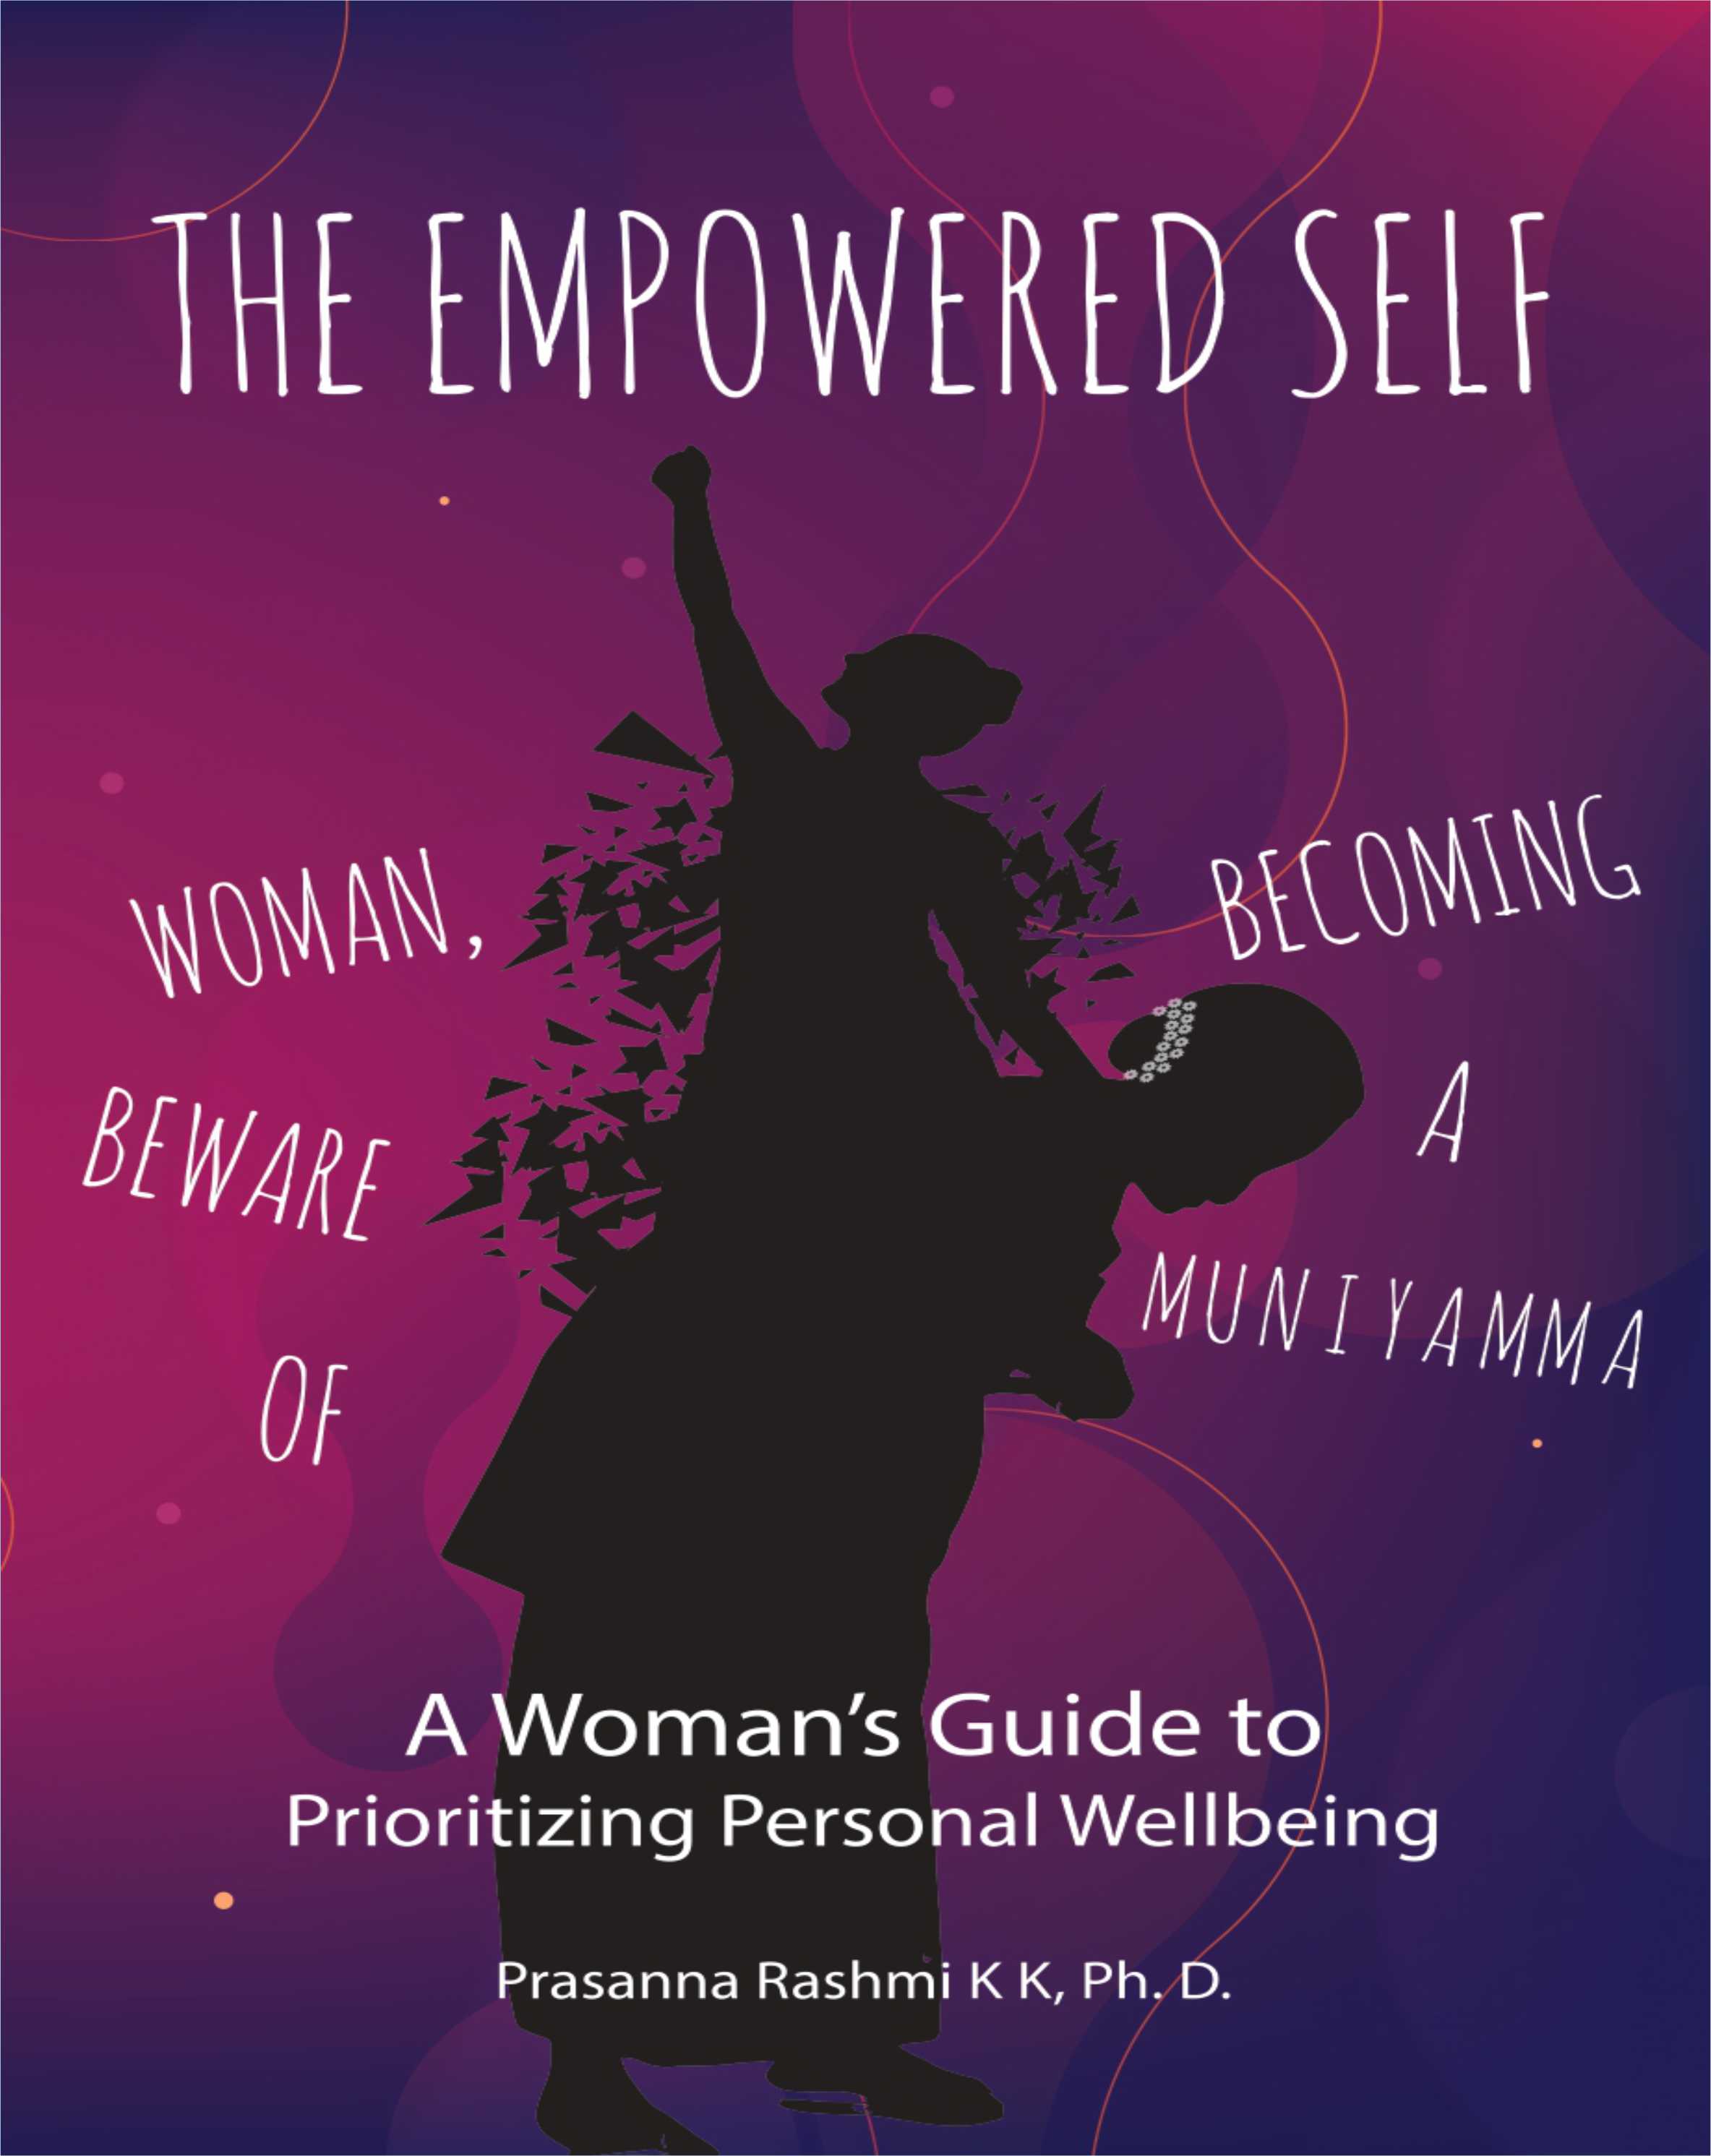 Woman, Beware Of Becoming A Muniyamma! The Empowered Self: A Woman's Guide To Prioritizing Personal Well-Being